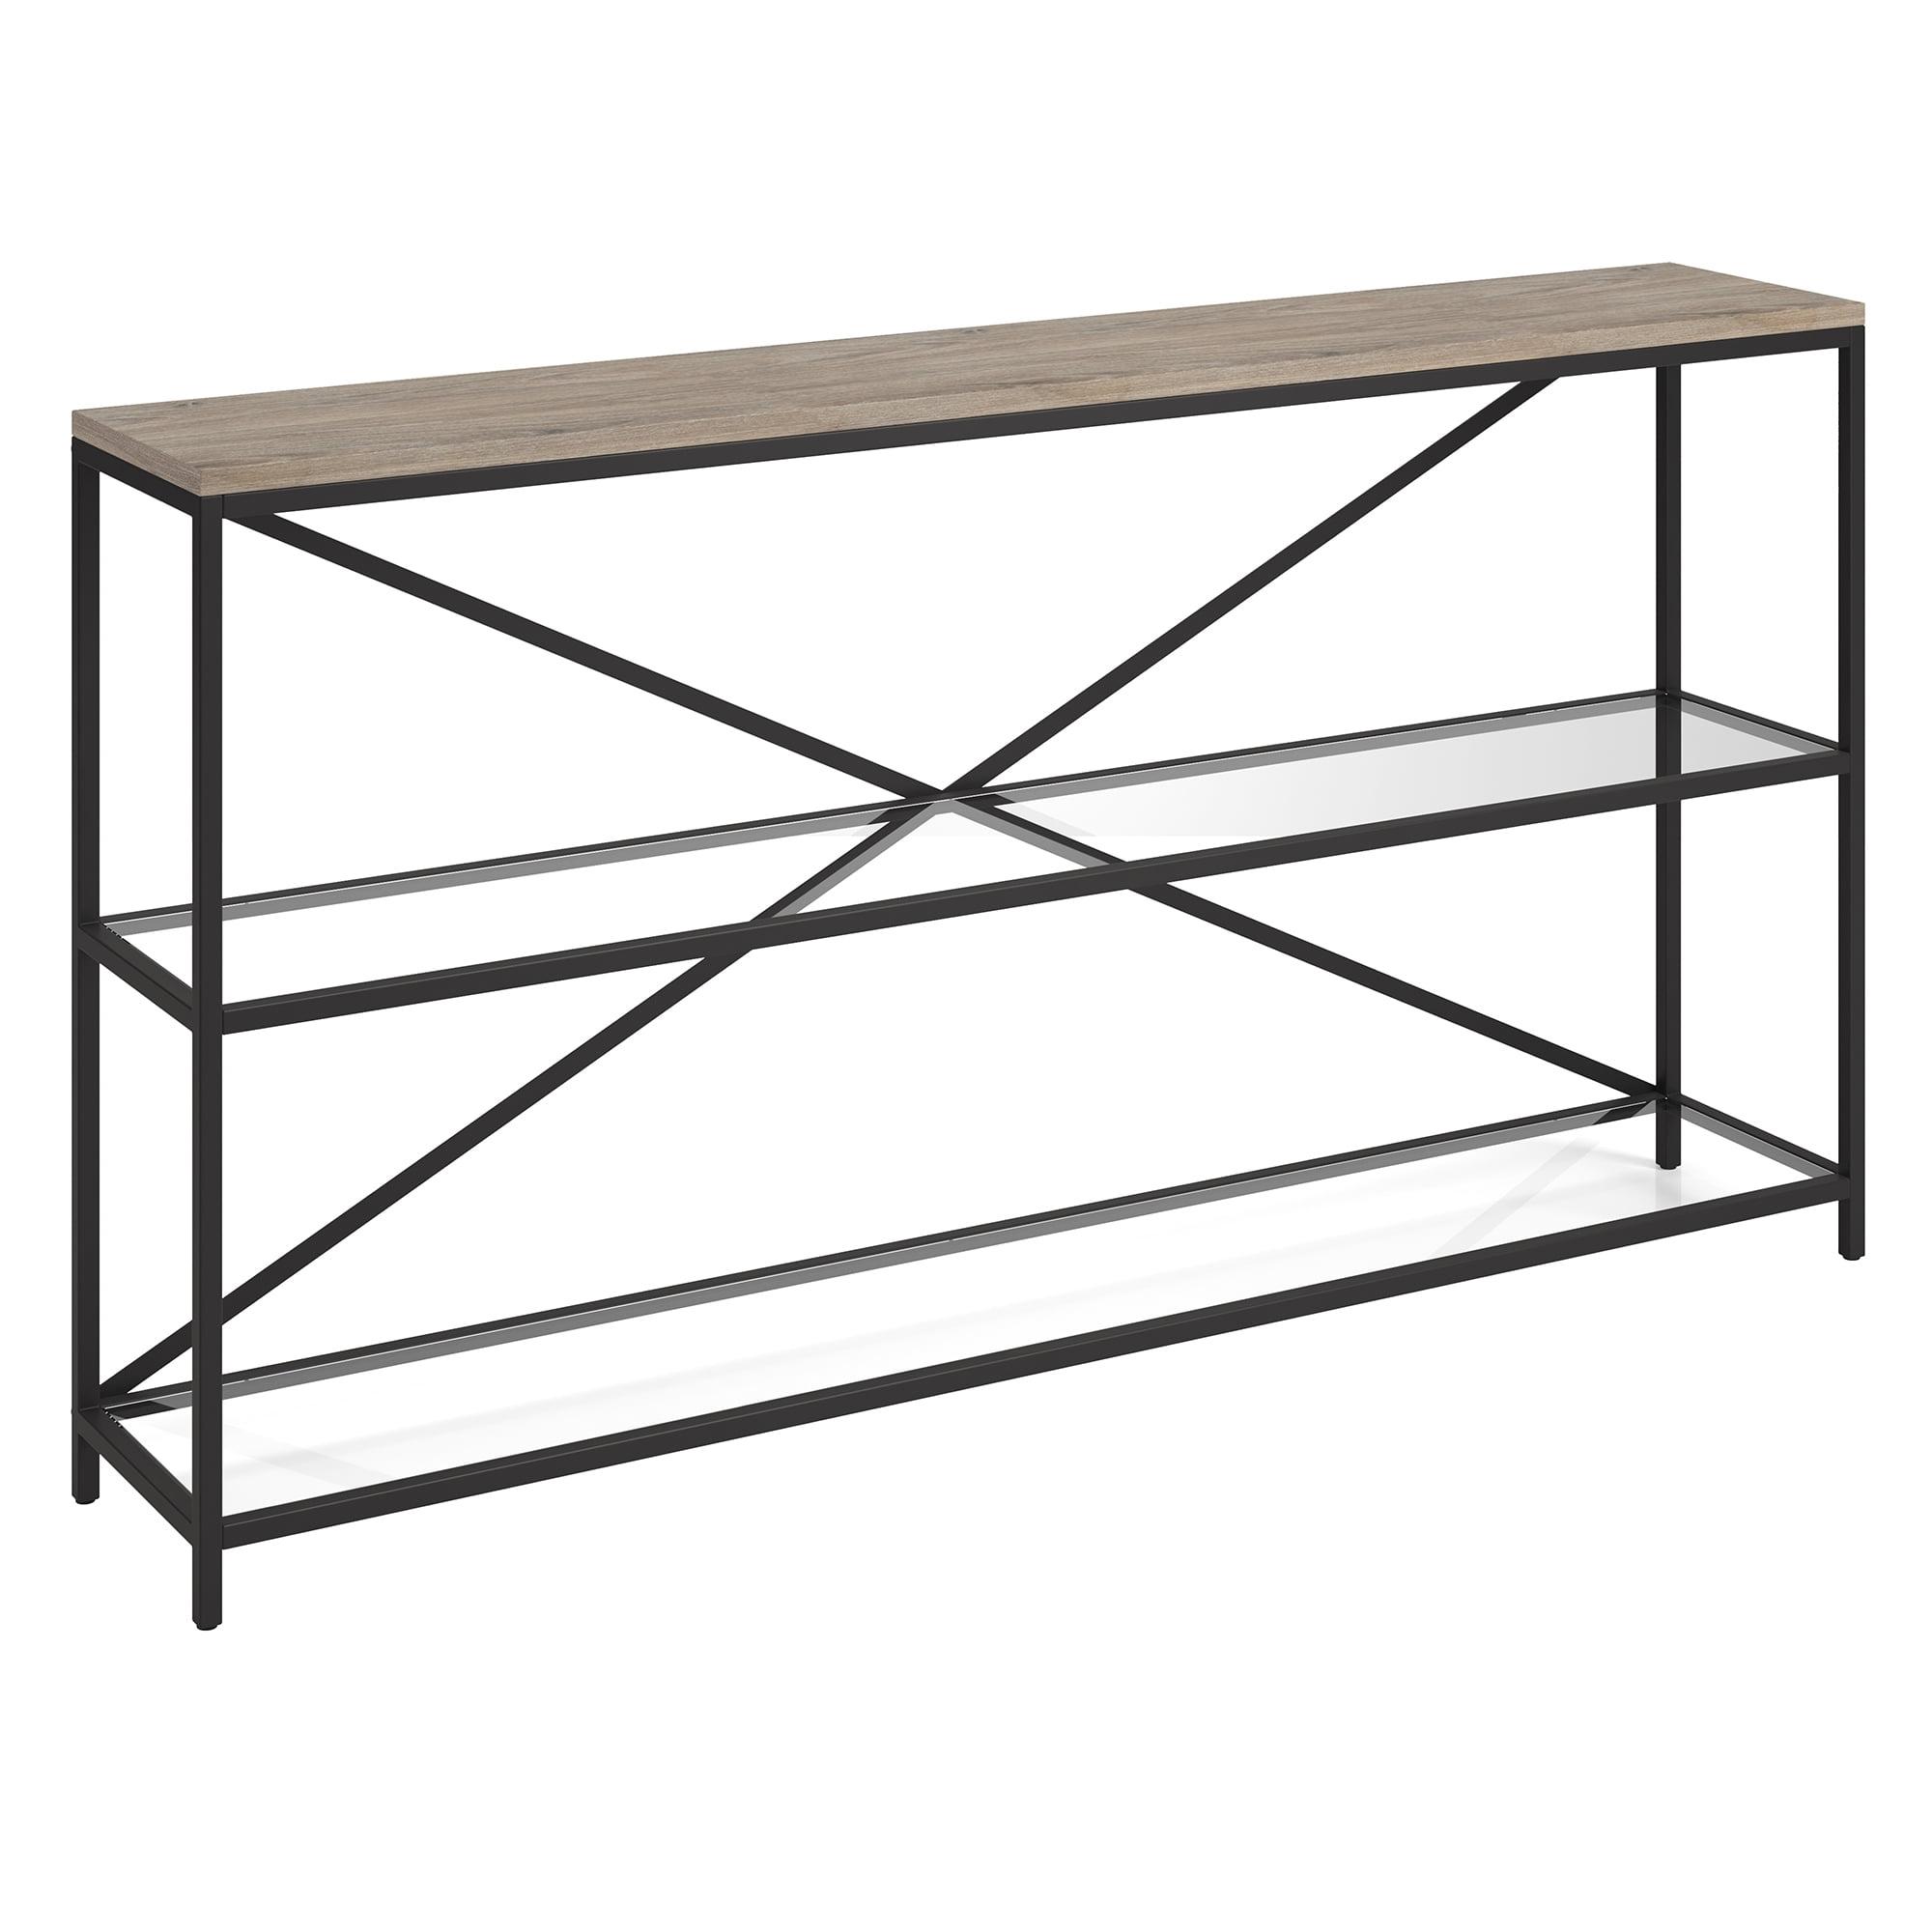 Fionn Blackened Bronze & Antiqued Gray Oak 55" Console Table with Glass Shelves